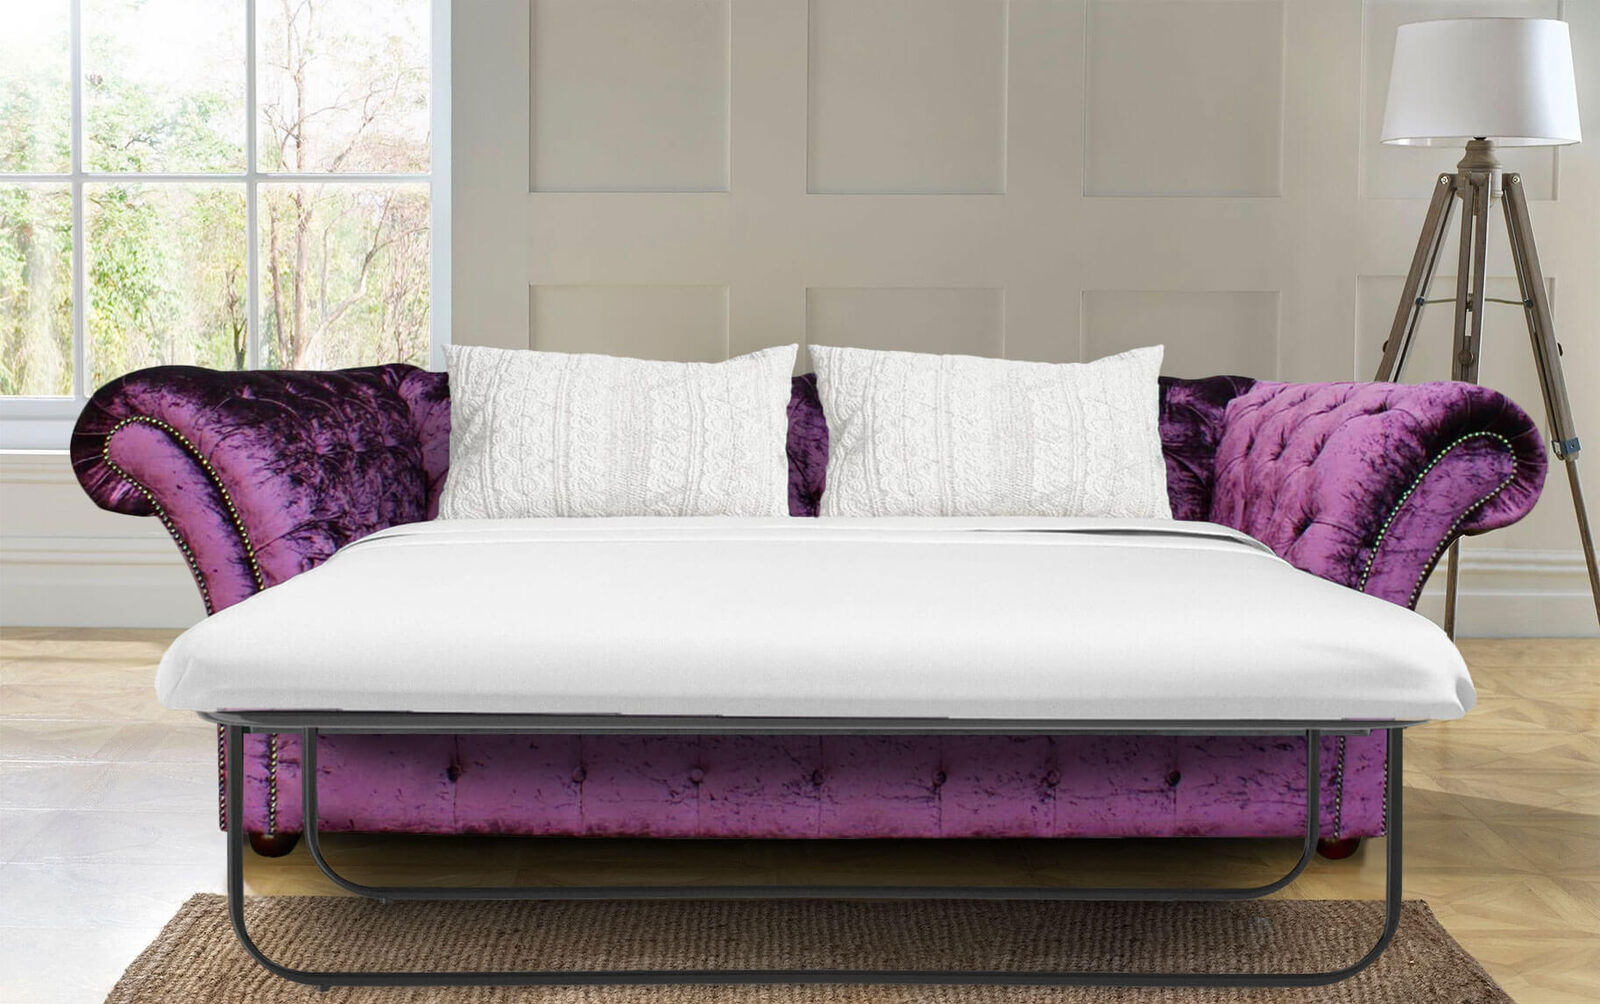 Product photograph of Chesterfield Belmont Purple 3 Seater Sofabed Settee Boutique Crush Velvet Fabric from Designer Sofas 4U